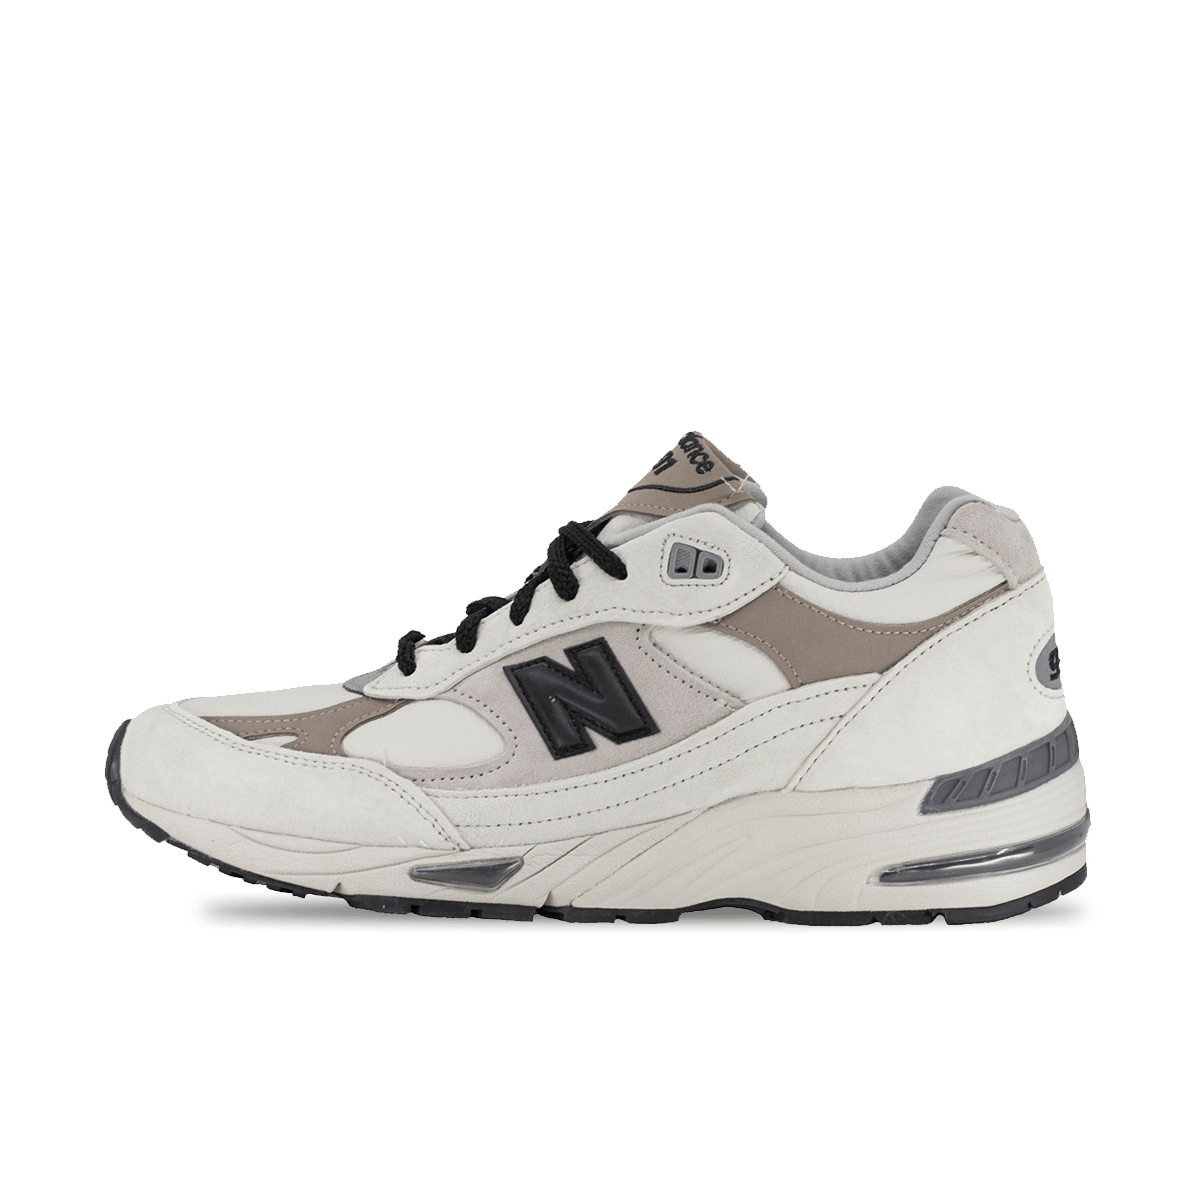 New Balance 991 'Pelican' - Made in UK